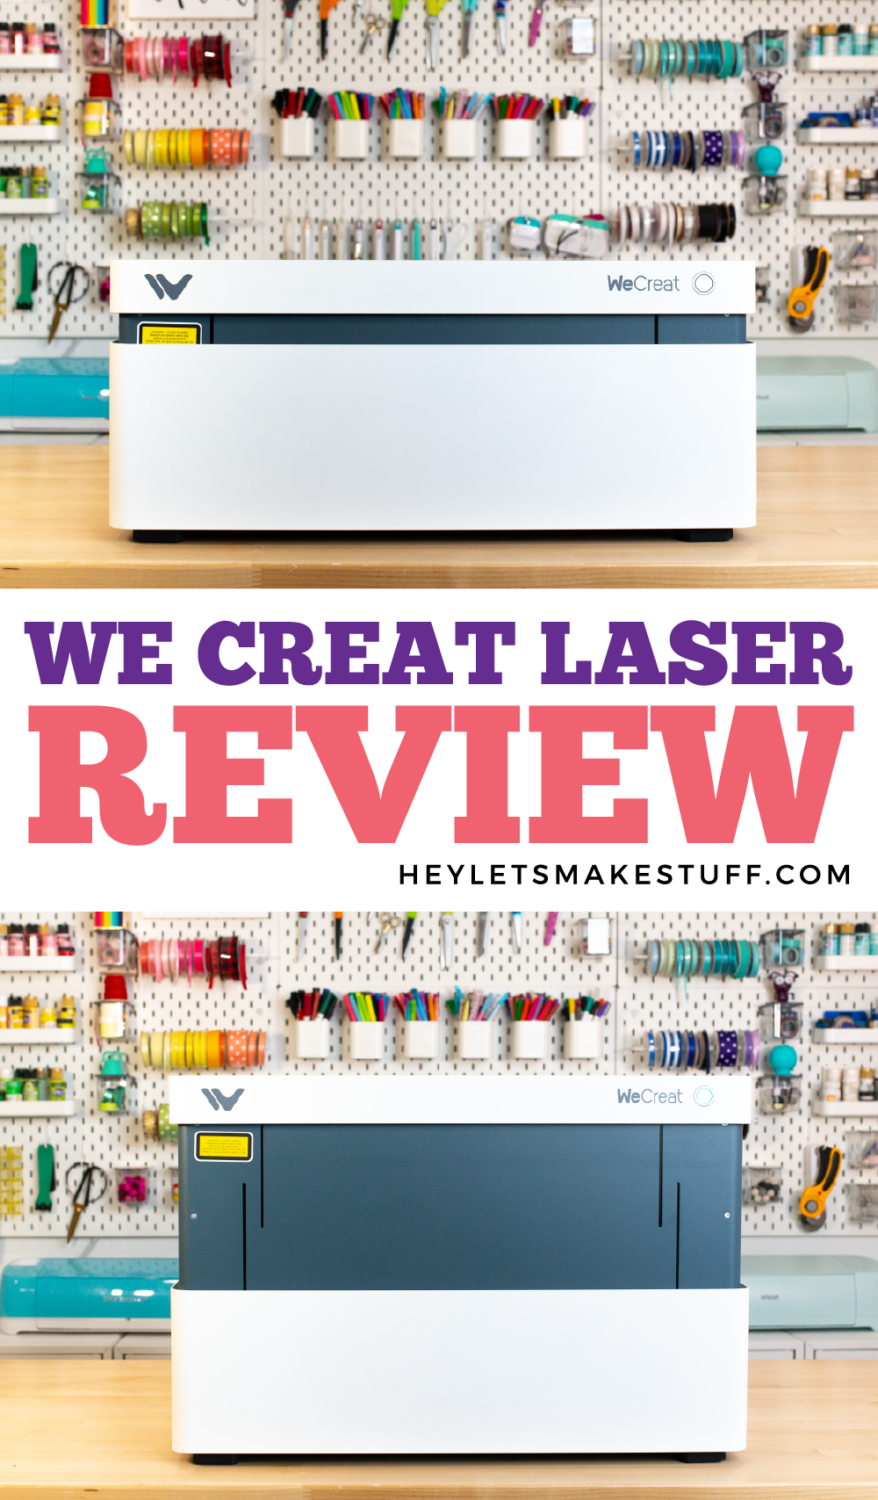 WeCreat Laser Review pin image